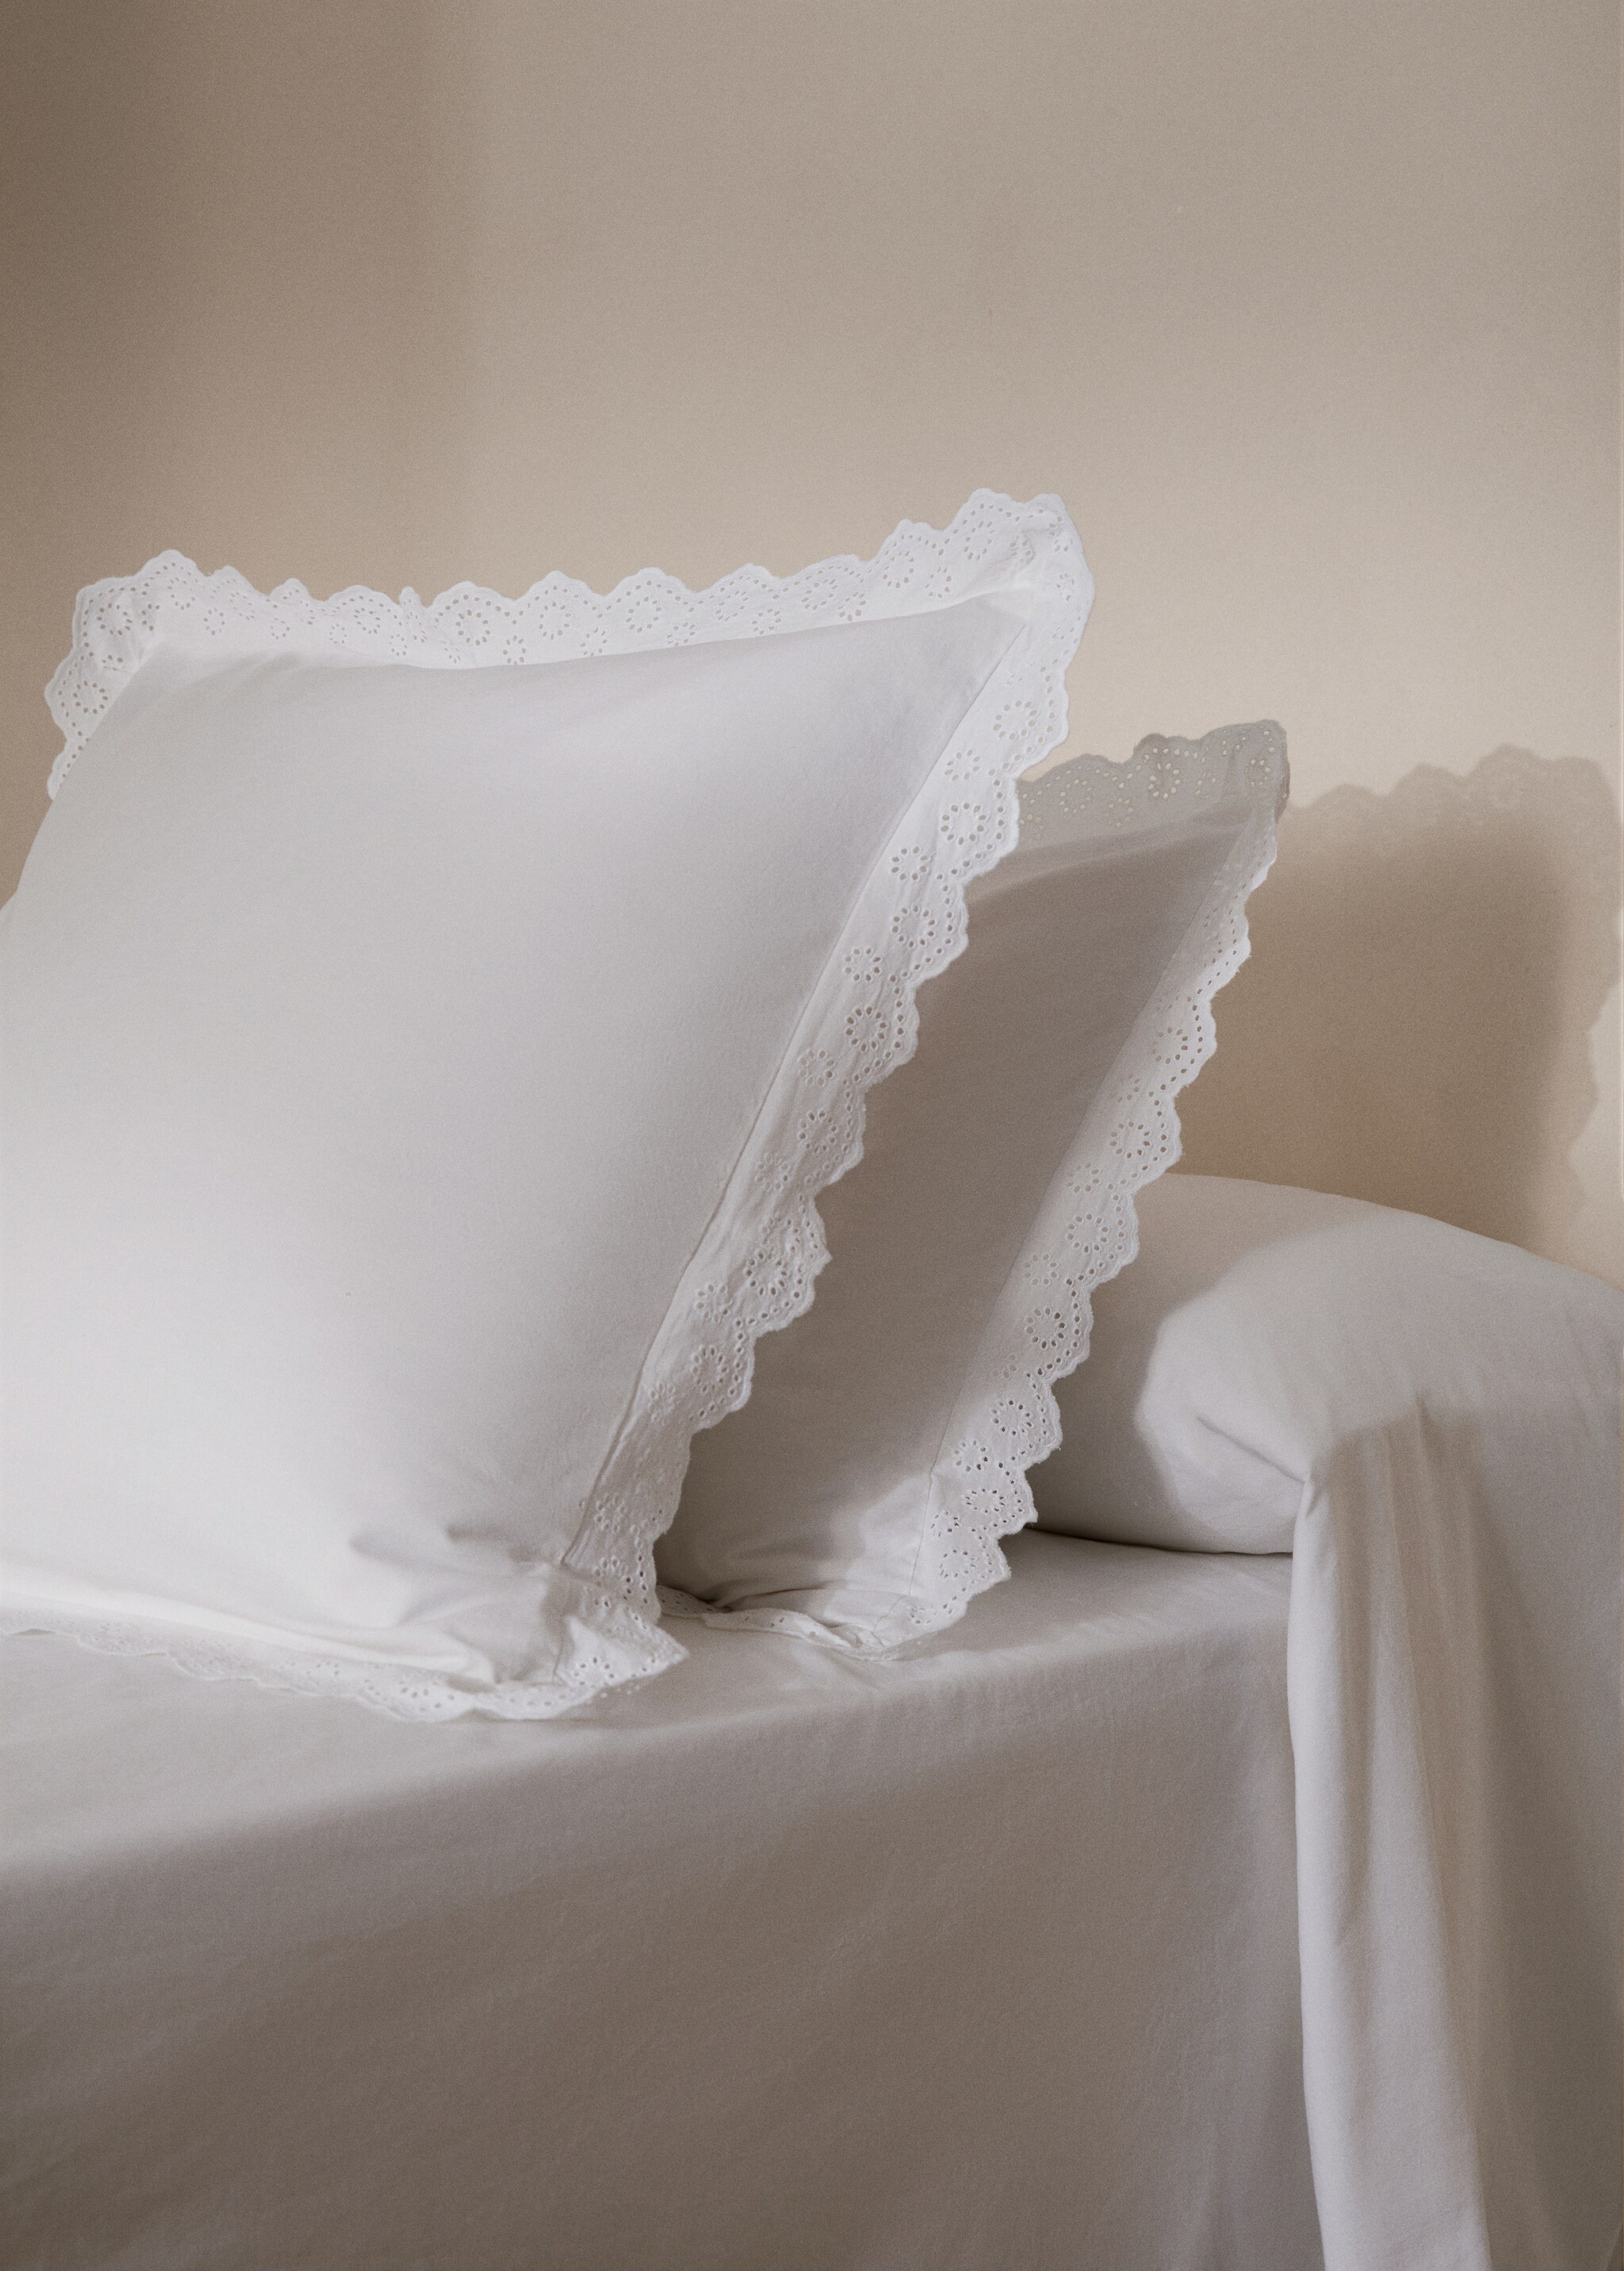 Embroidered ruffled pillowcase 45x110cm - General plane